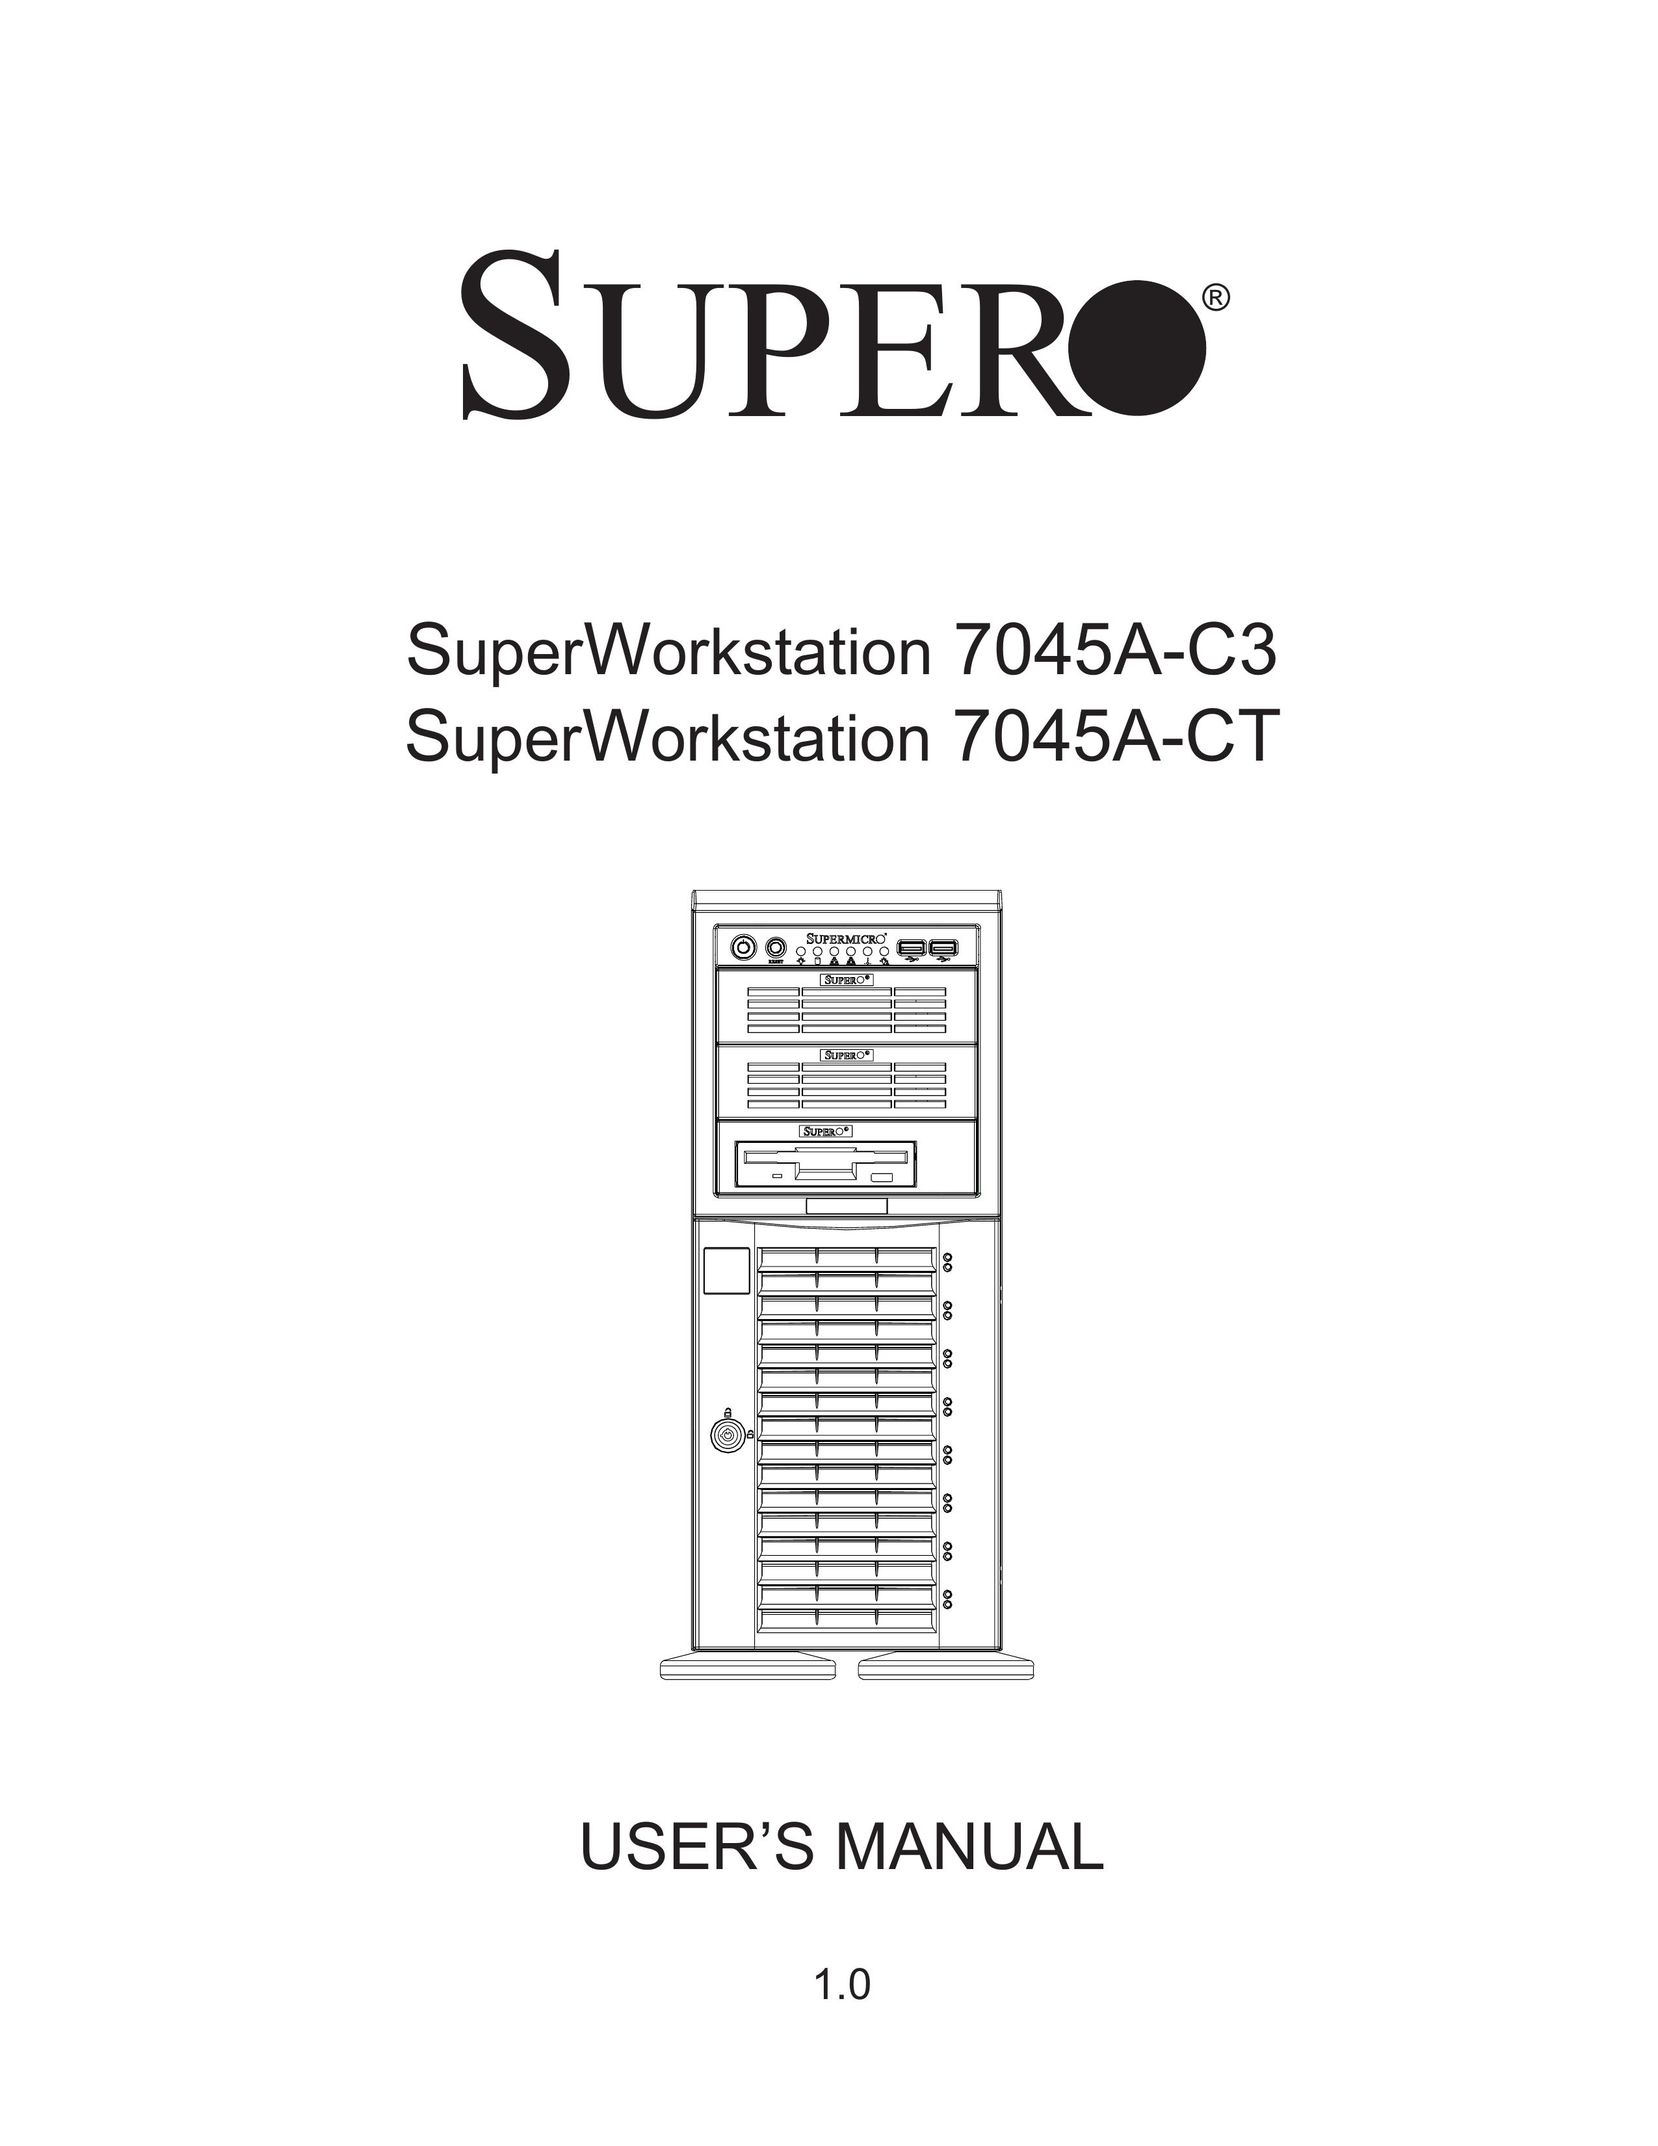 SUPER MICRO Computer 7045A-CT Musical Table User Manual